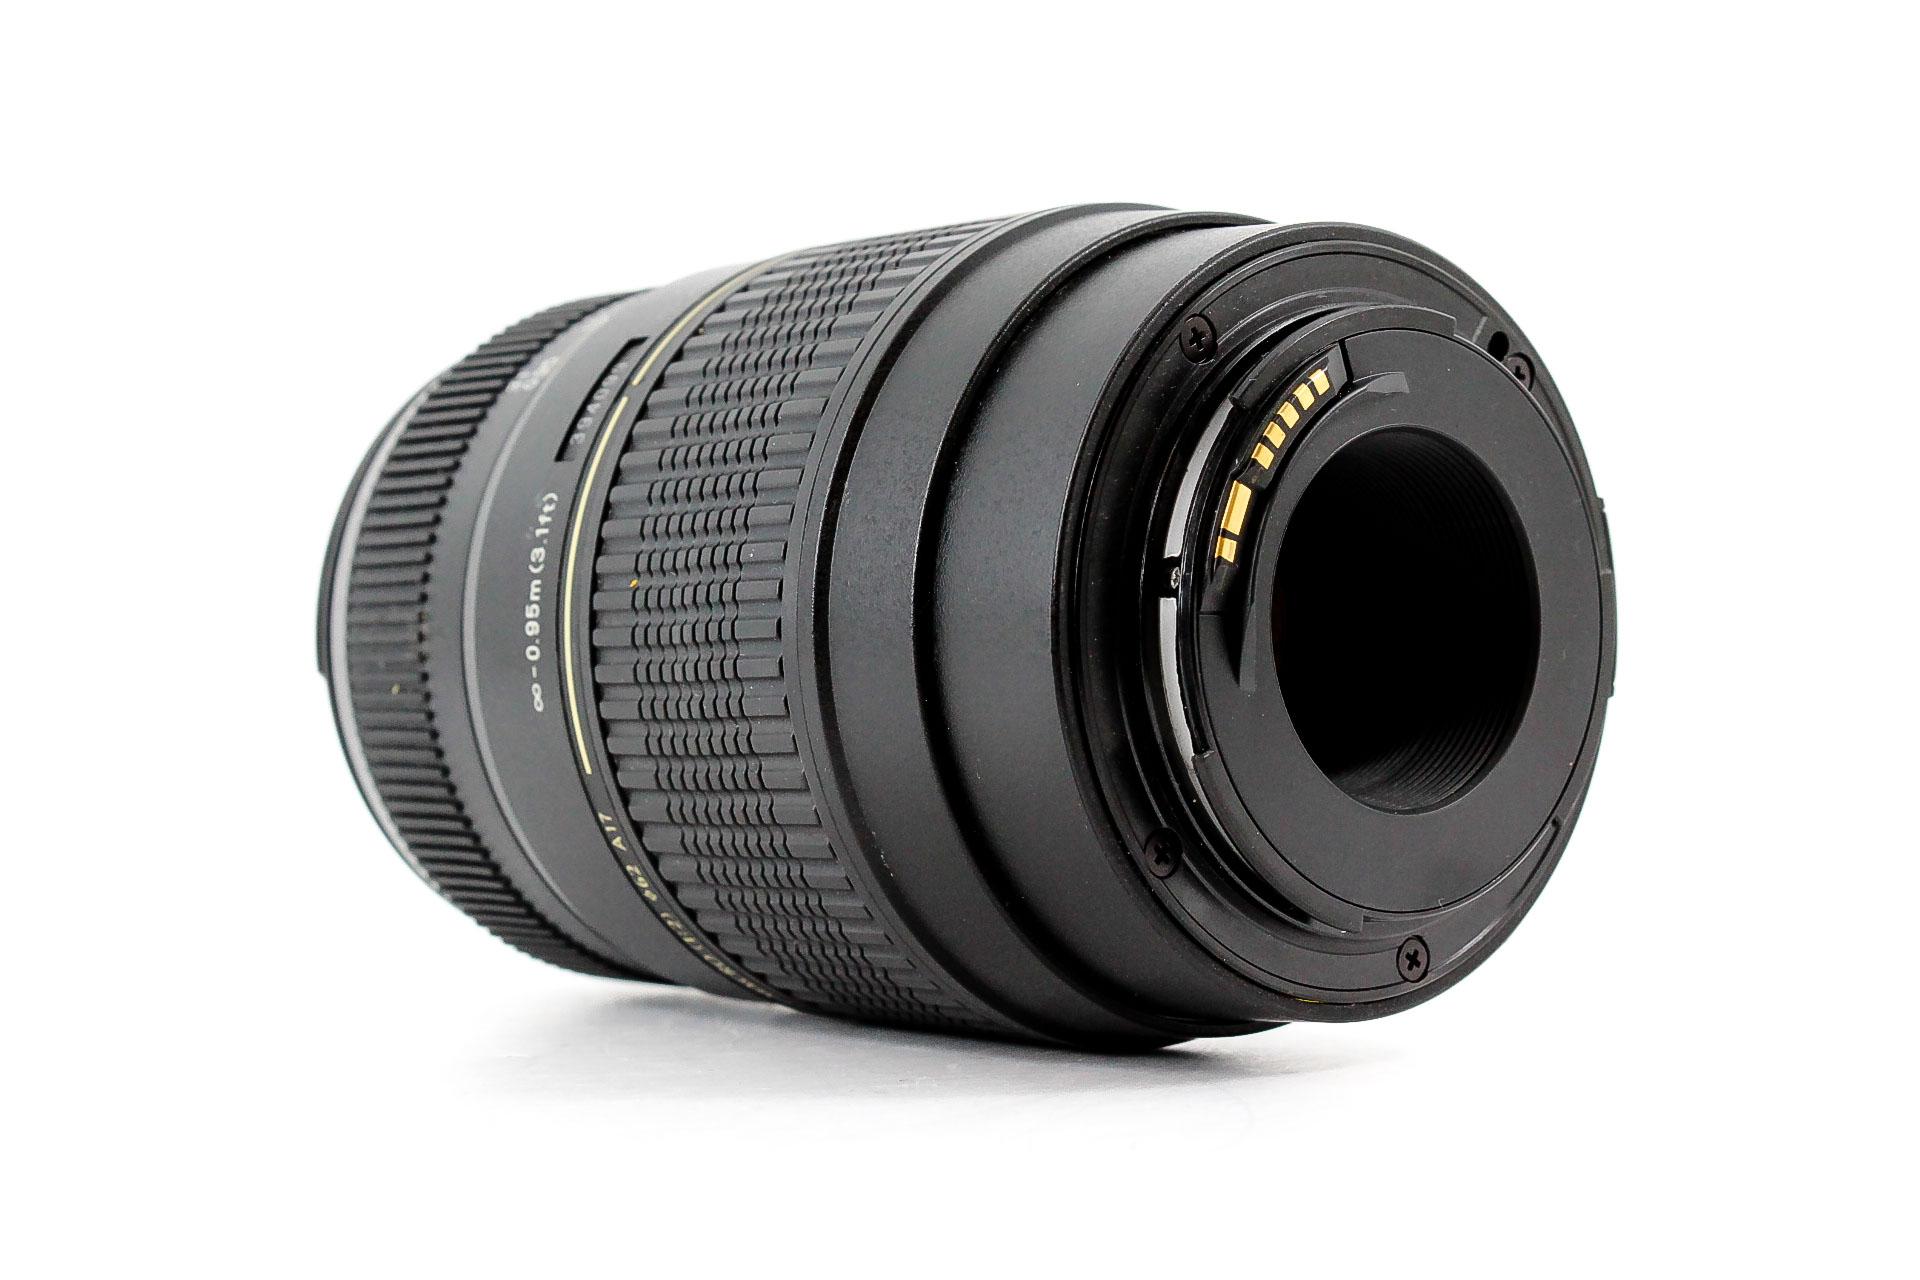 Tamron AF 70-300mm f/4-5.6 Di LD Macro for Canon Lens - Lenses and Cameras